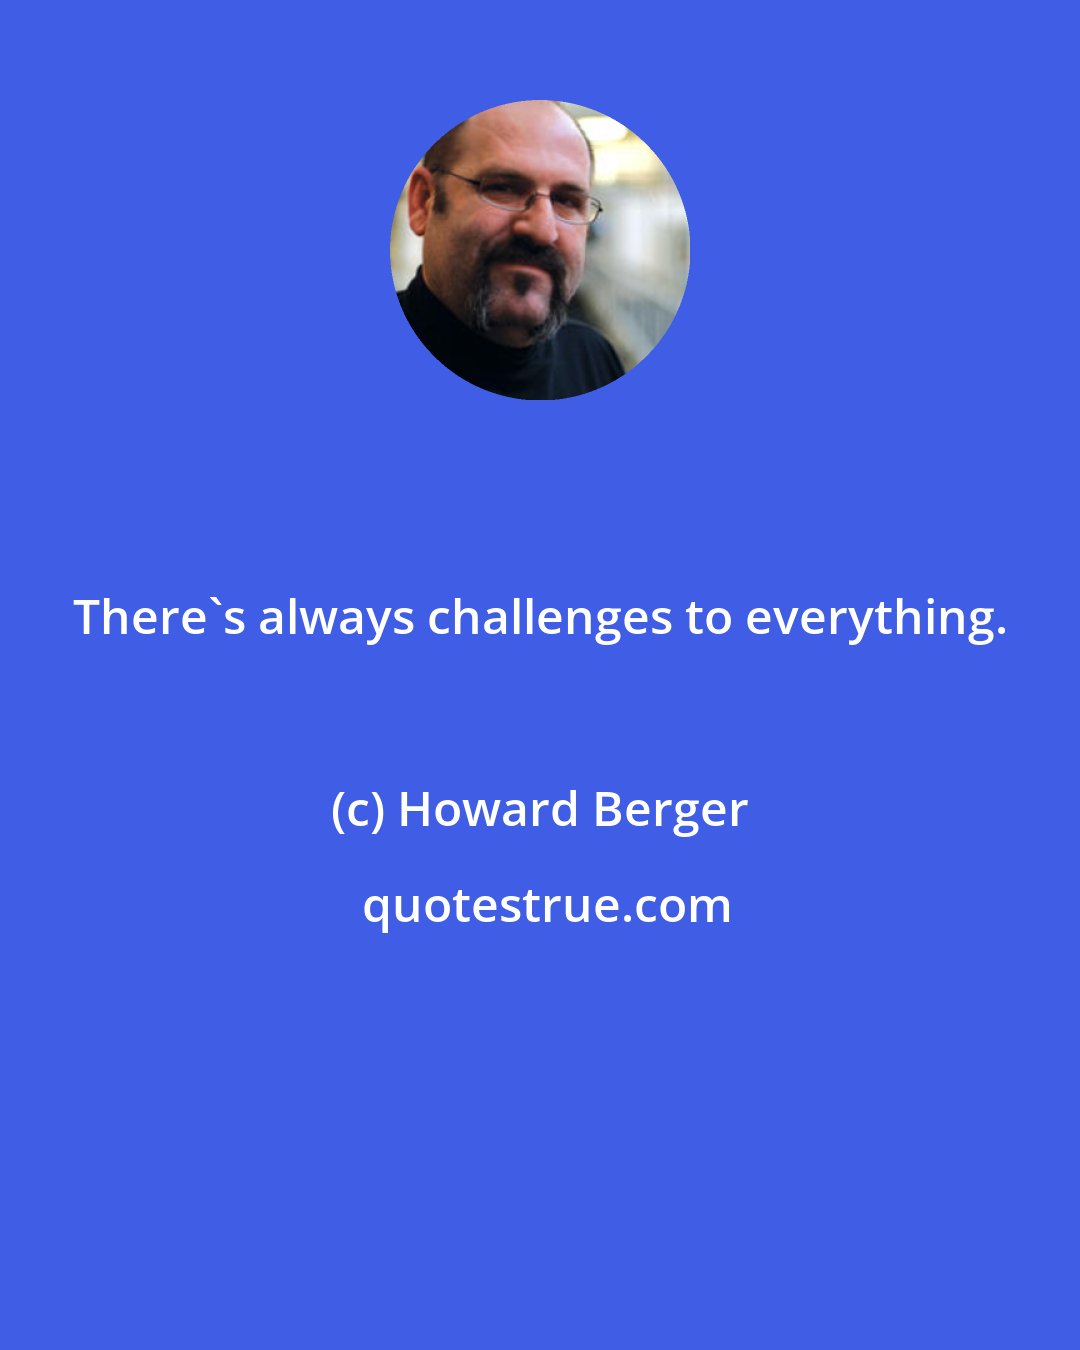 Howard Berger: There's always challenges to everything.